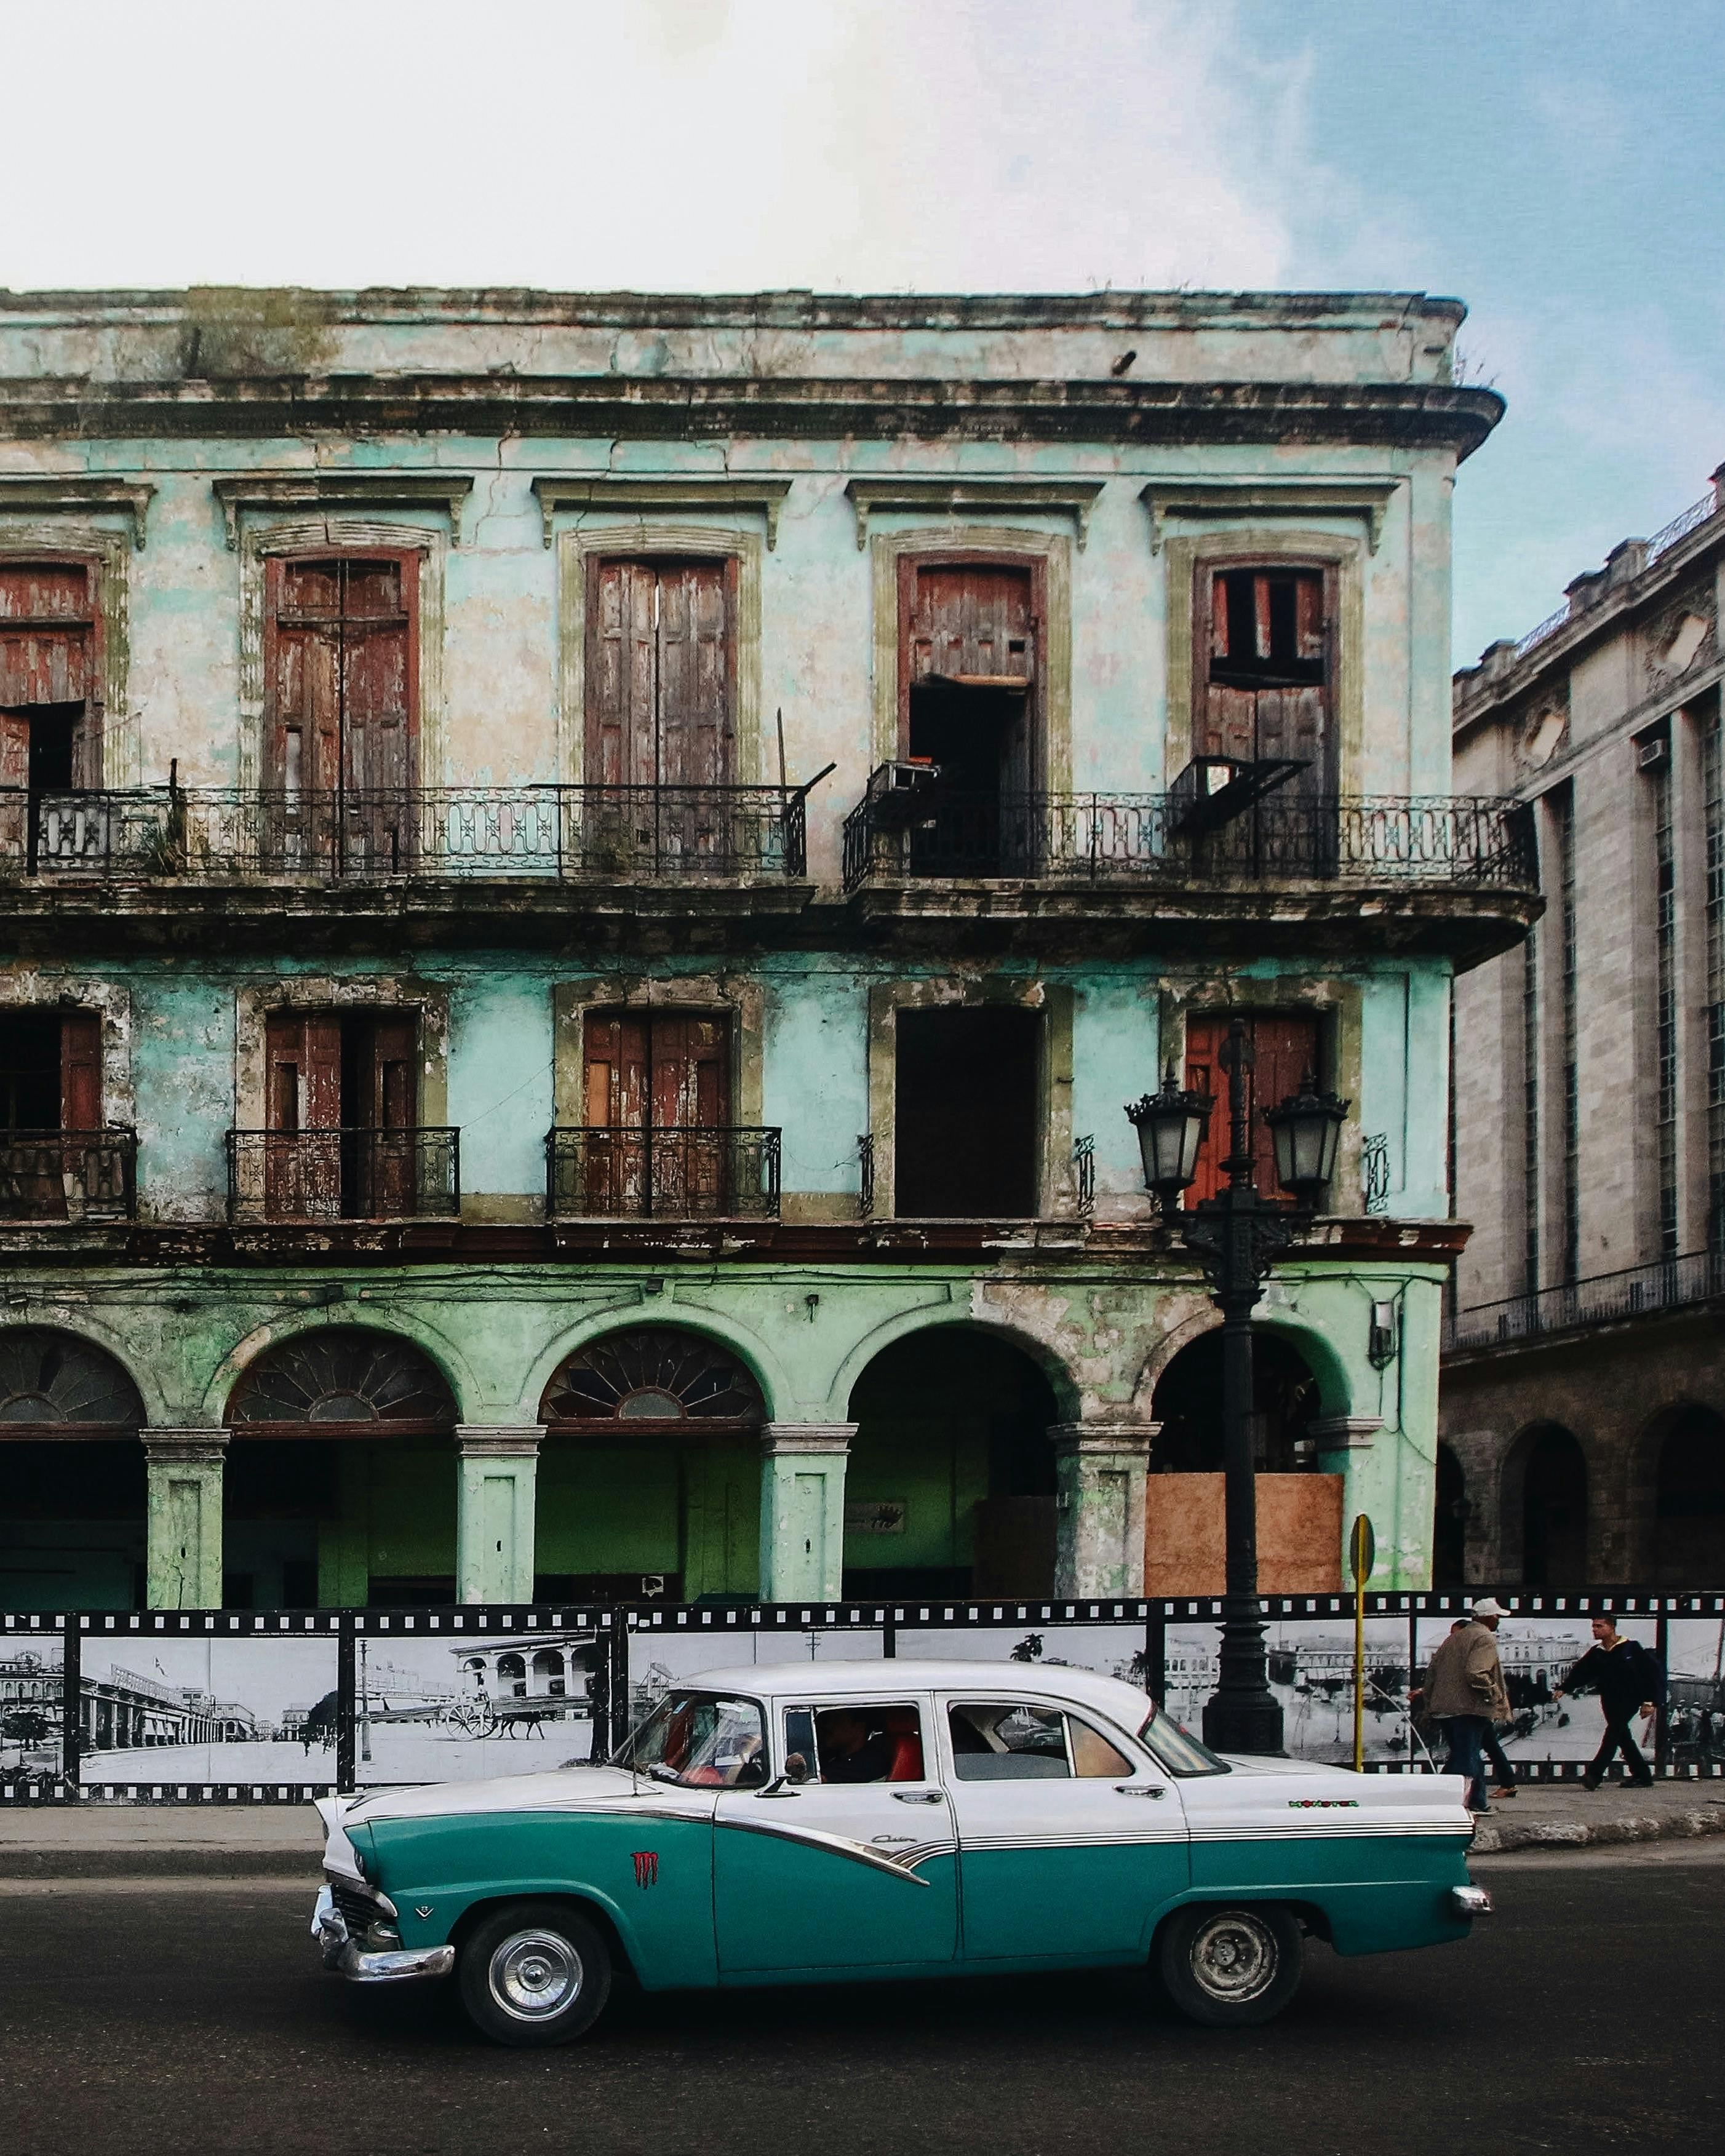 A Chevrolet 210 in front of an Abandoned Building in Havana, Cuba 